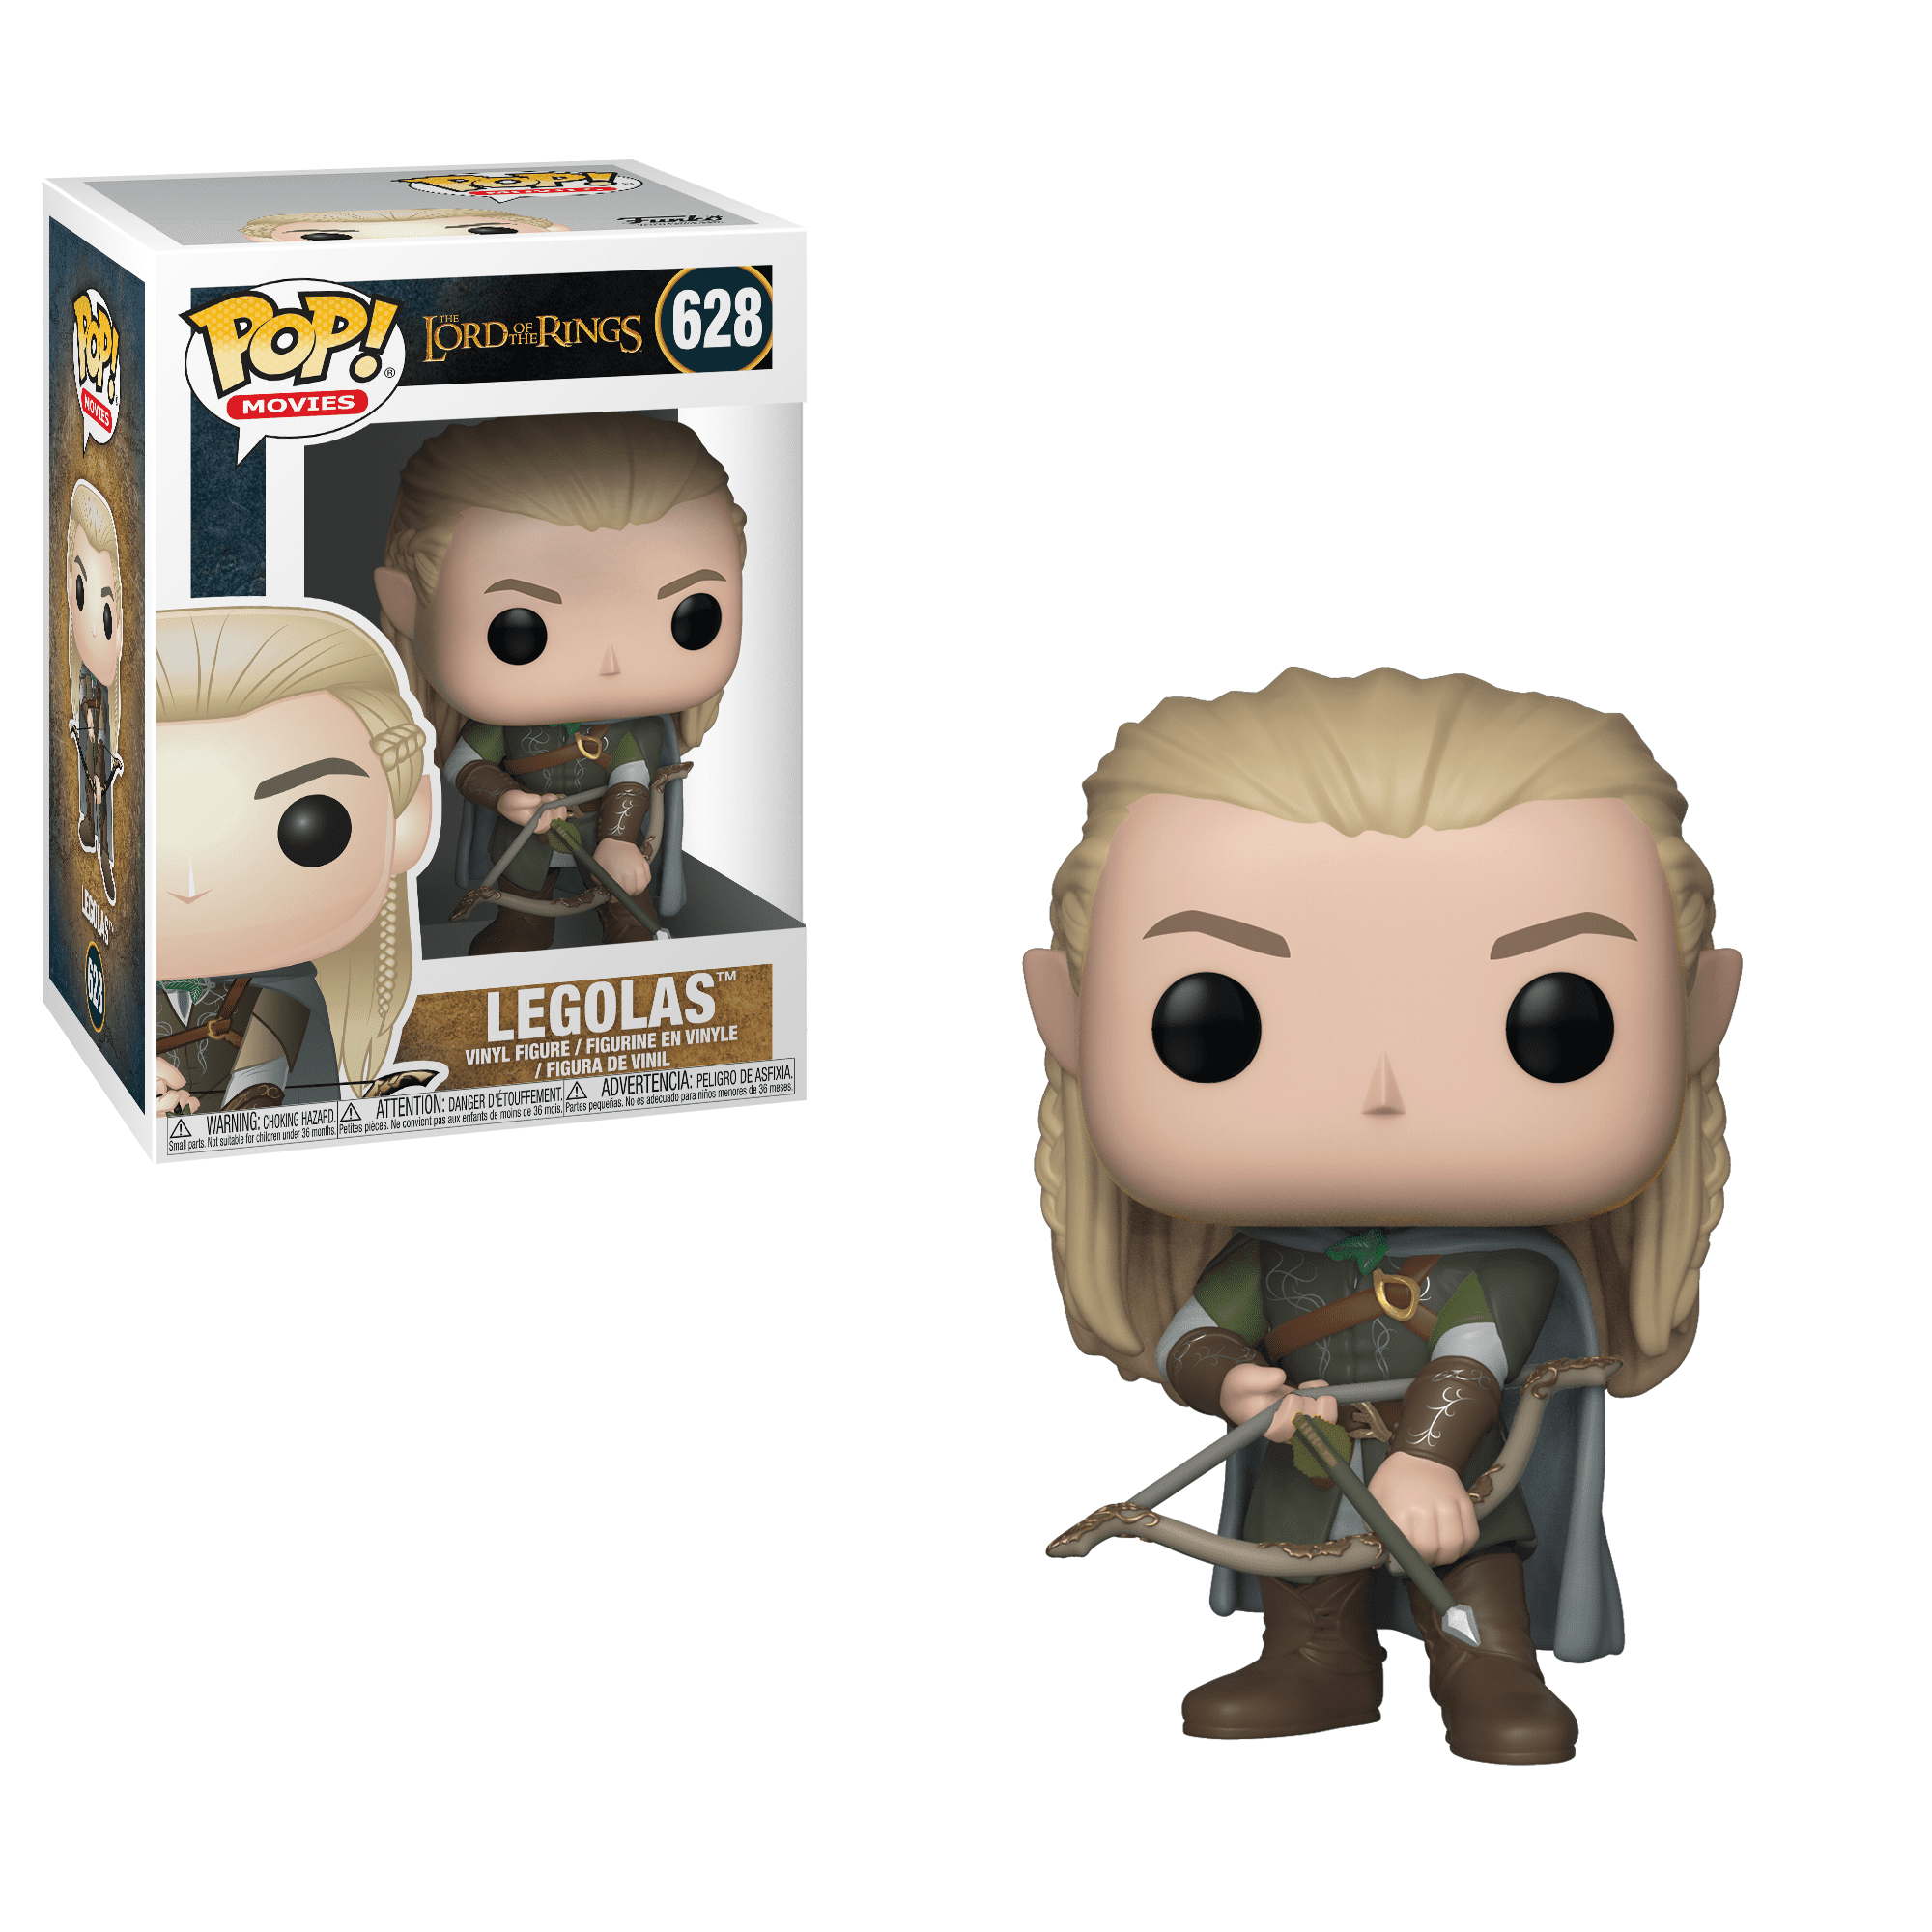 Movies-Lord of The Rings-Frodo Baggins #13551 Funko POP 